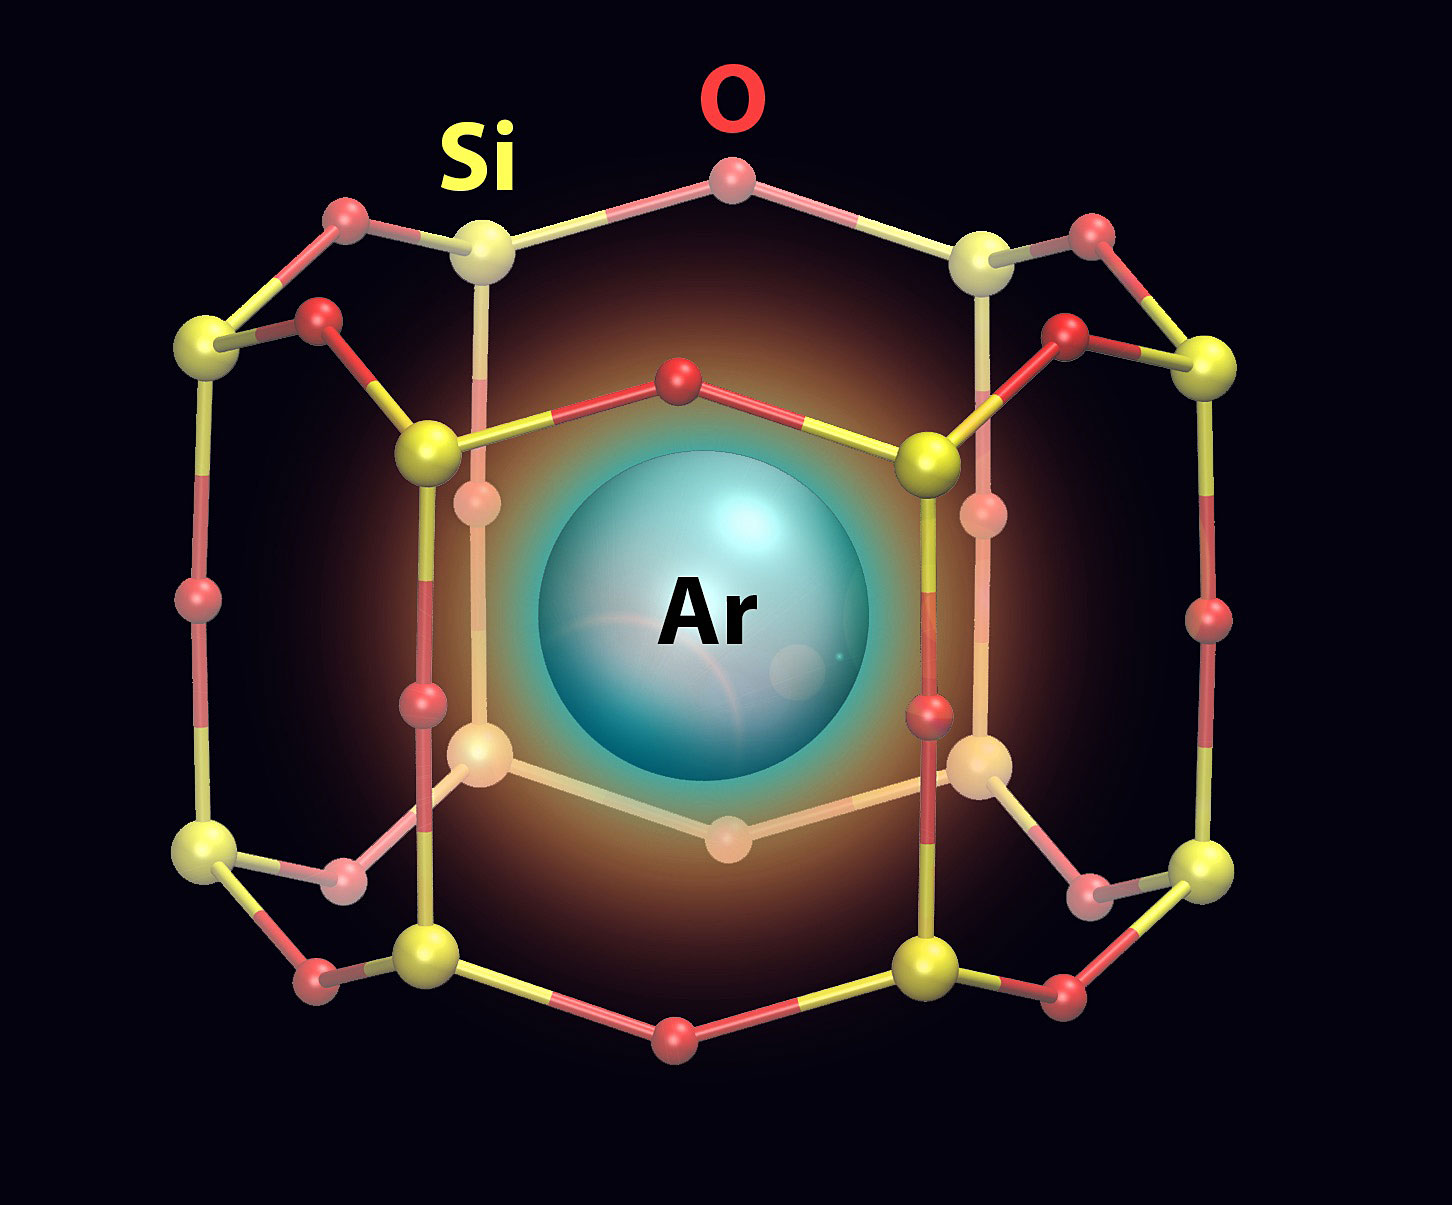 Studying Argon Gas Trapped in Two-Dimensional Array of Tiny Cages